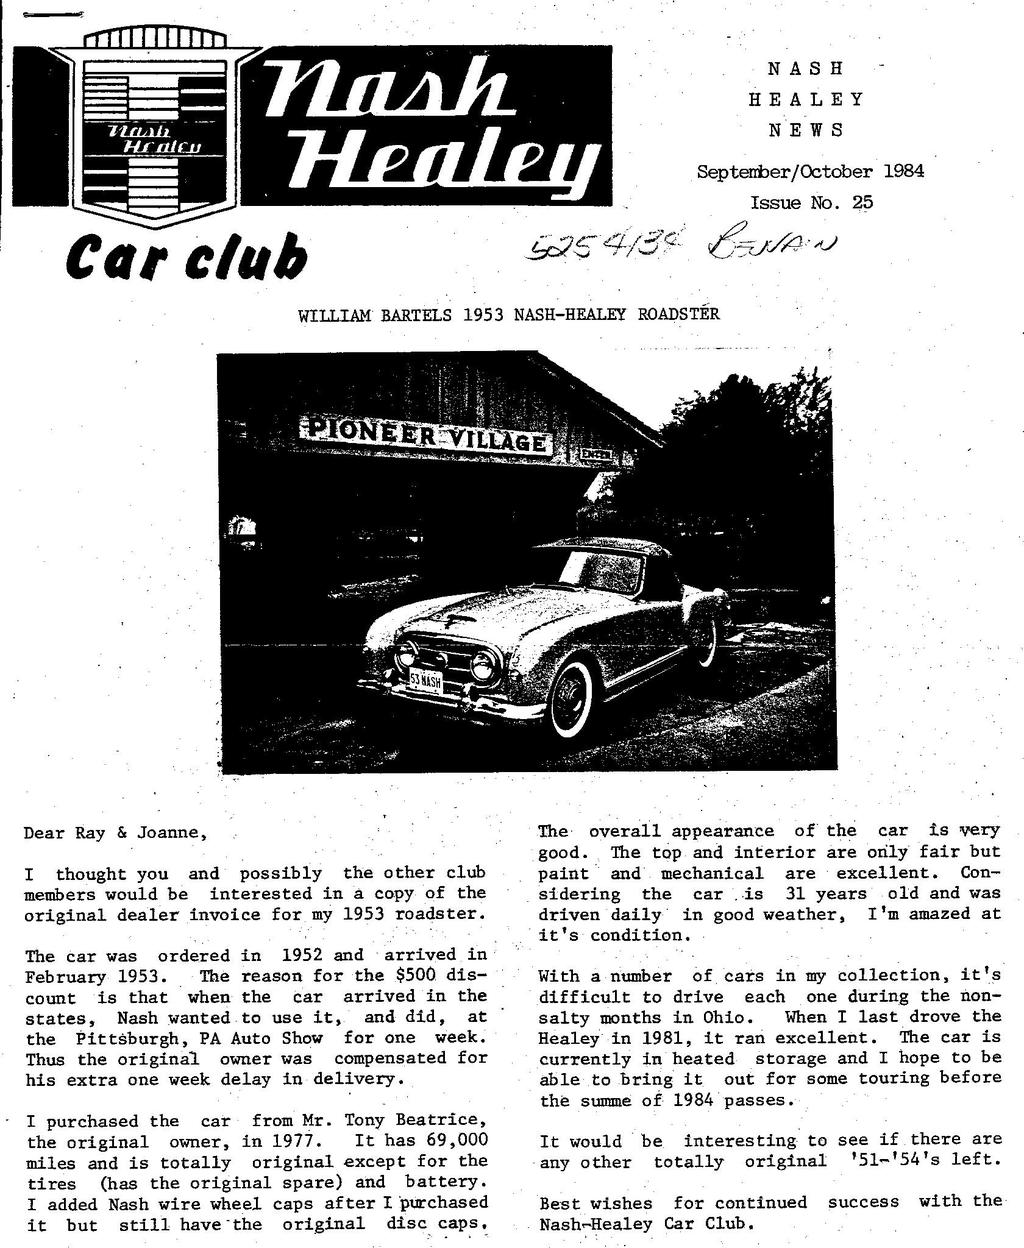 Registered owner feature The copy to the left is reproduced from an article in the 1984 issue of the Nash Healey Car Club Magazine. When Mr.